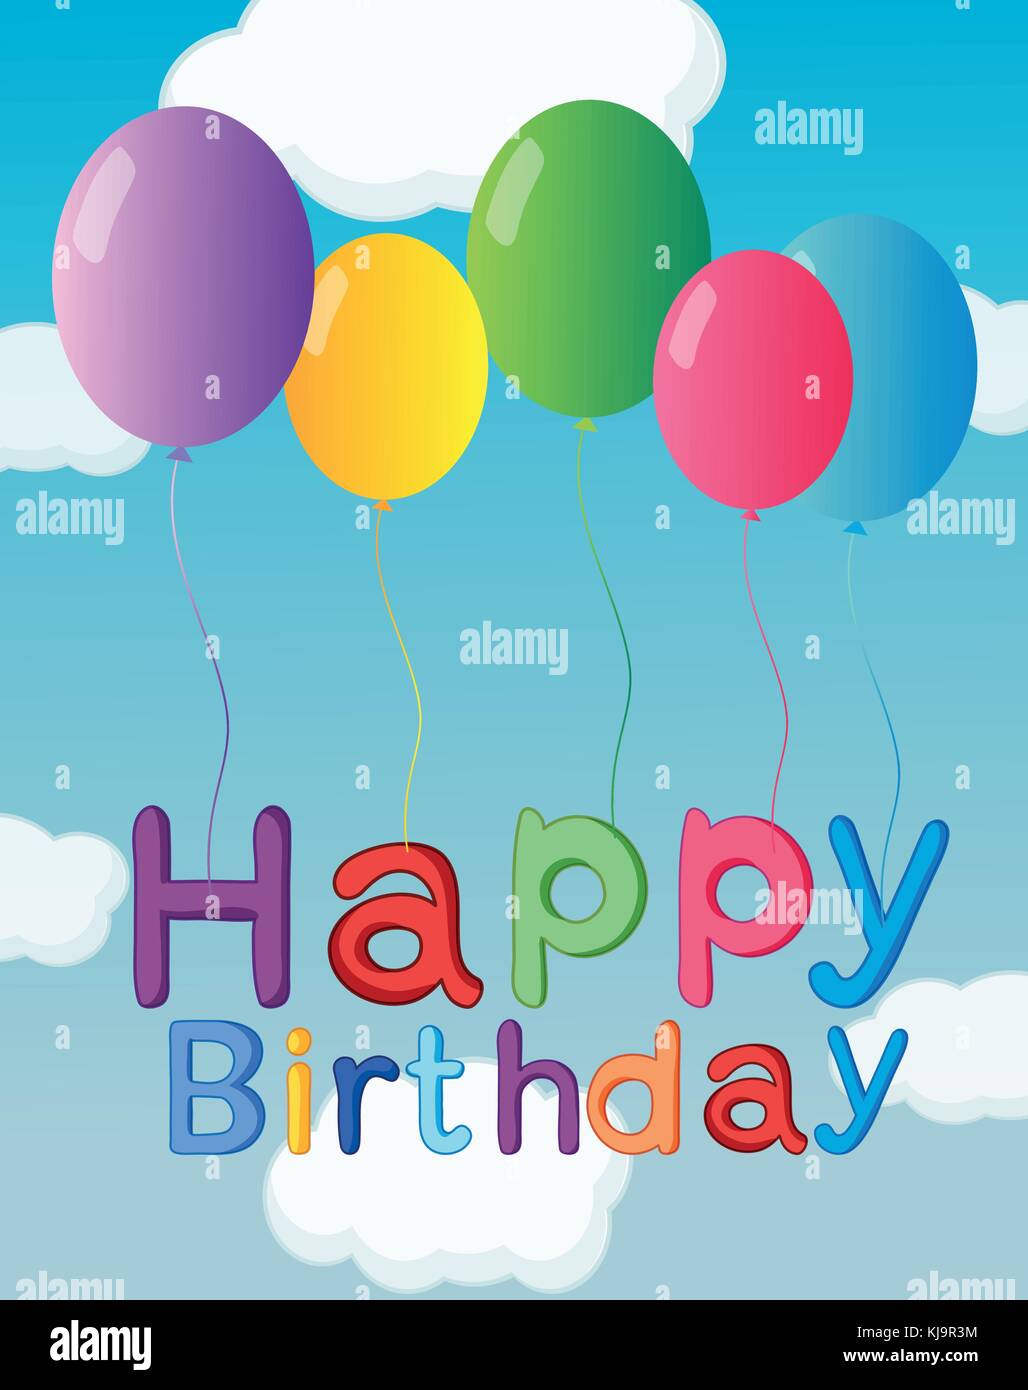 Illustration of the happy birthday greeting with balloons Stock Vector ...